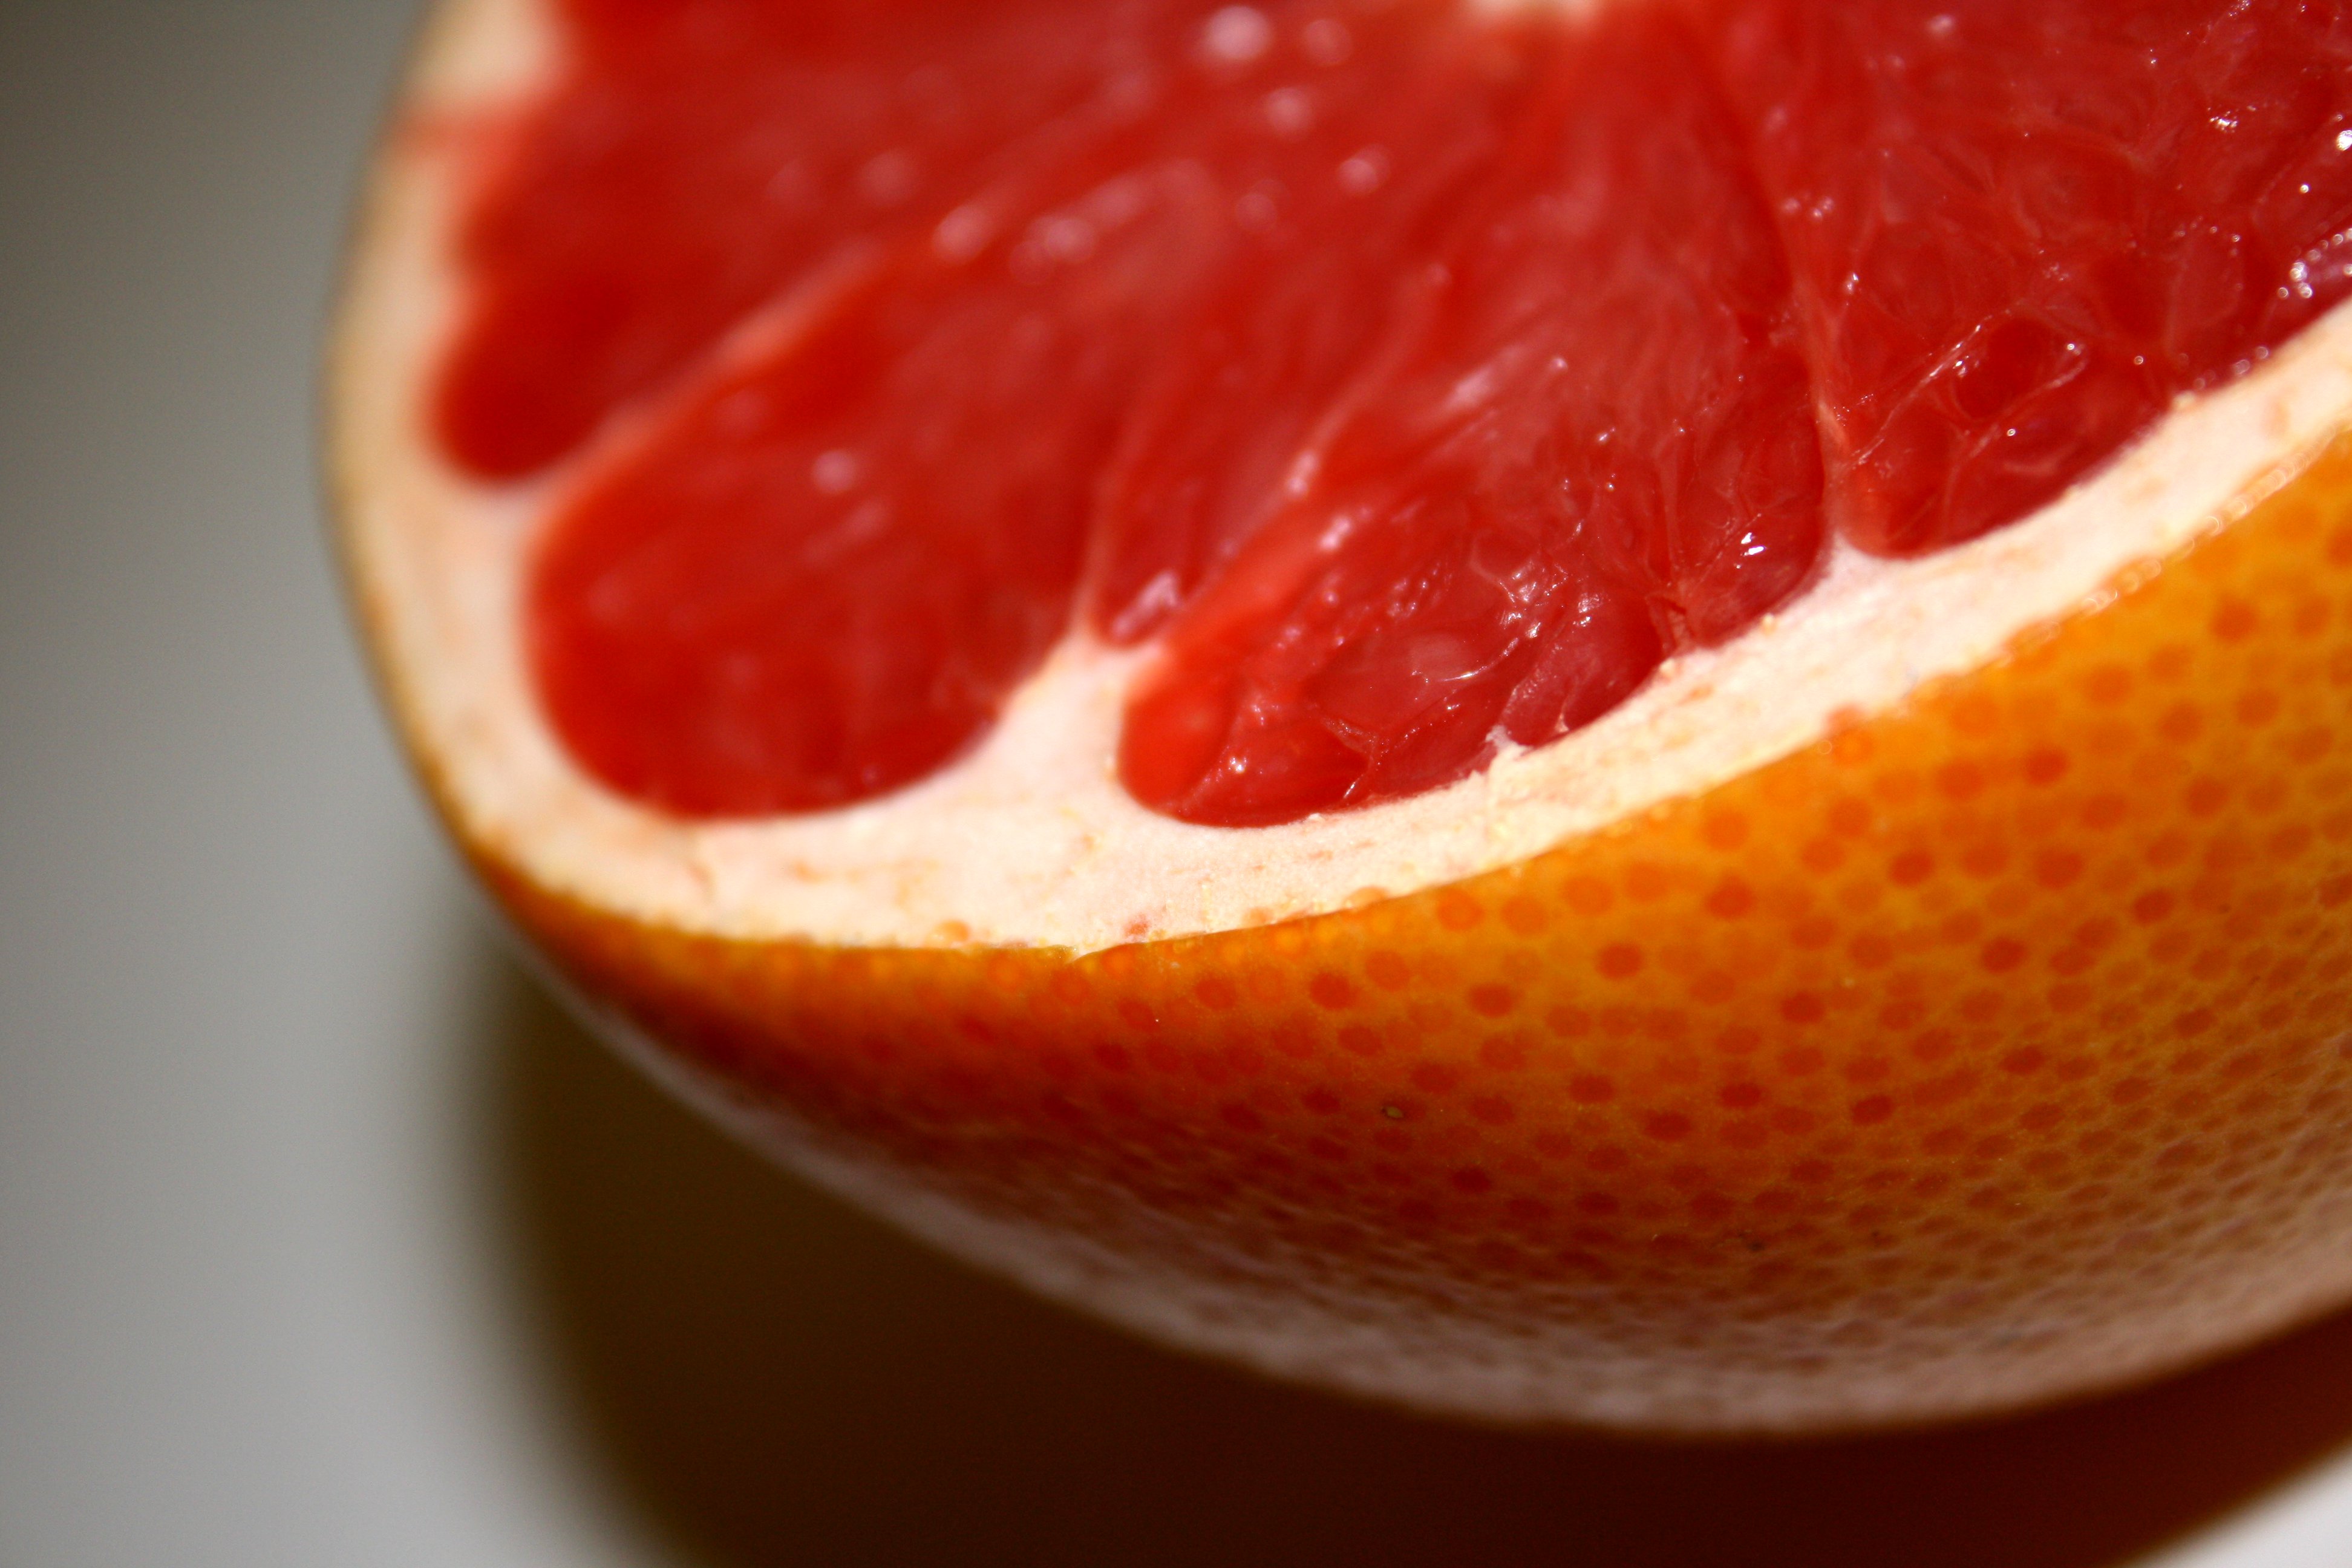 Ruby Red Grapefruit Closeup Picture | Free Photograph | Photos ...